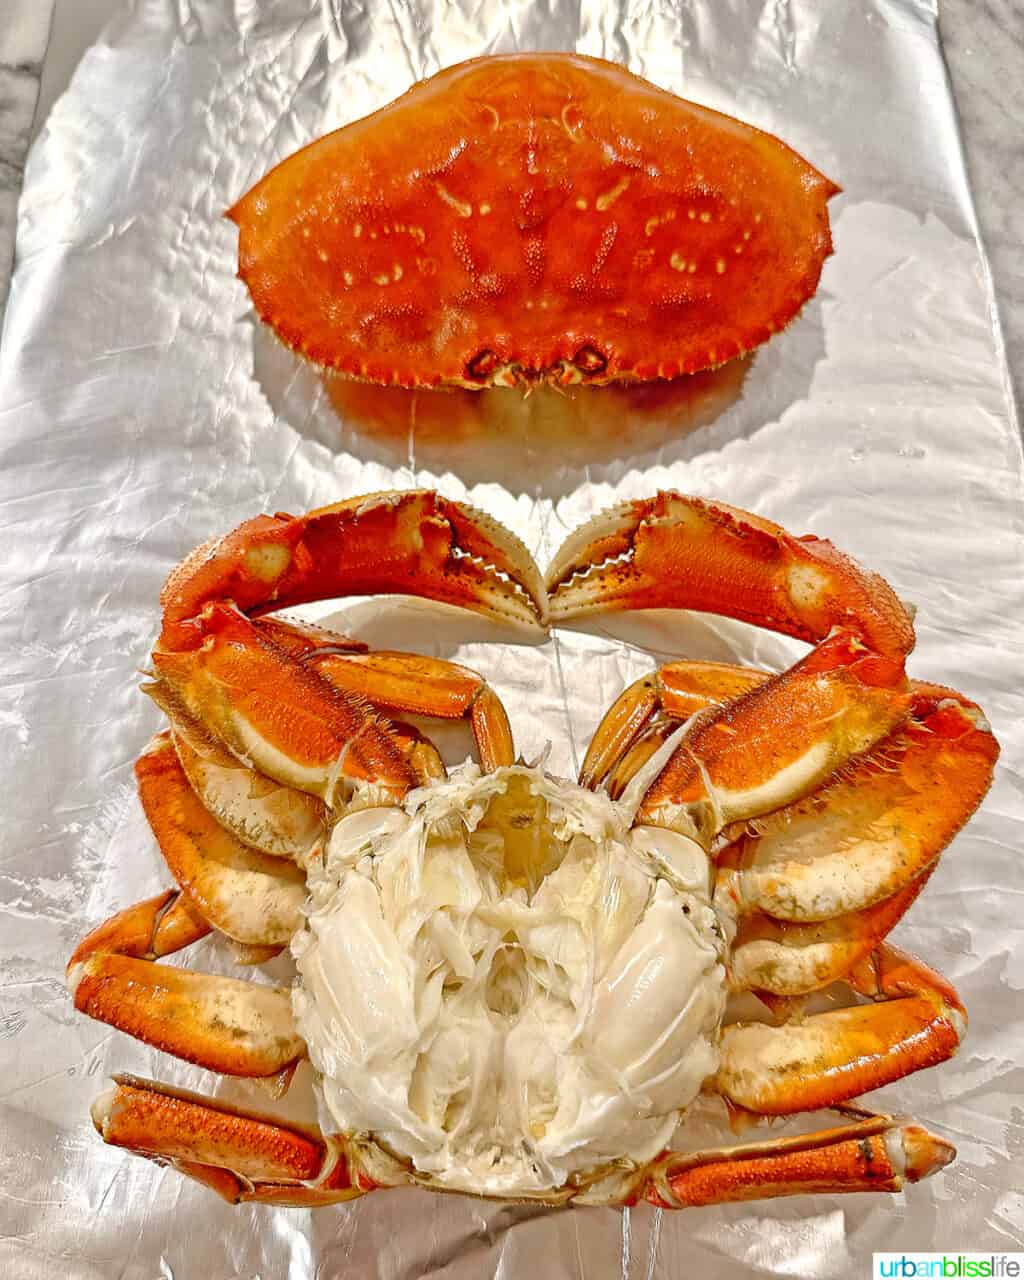 A cooked and cleaned Dungeness crab on aluminum foil.